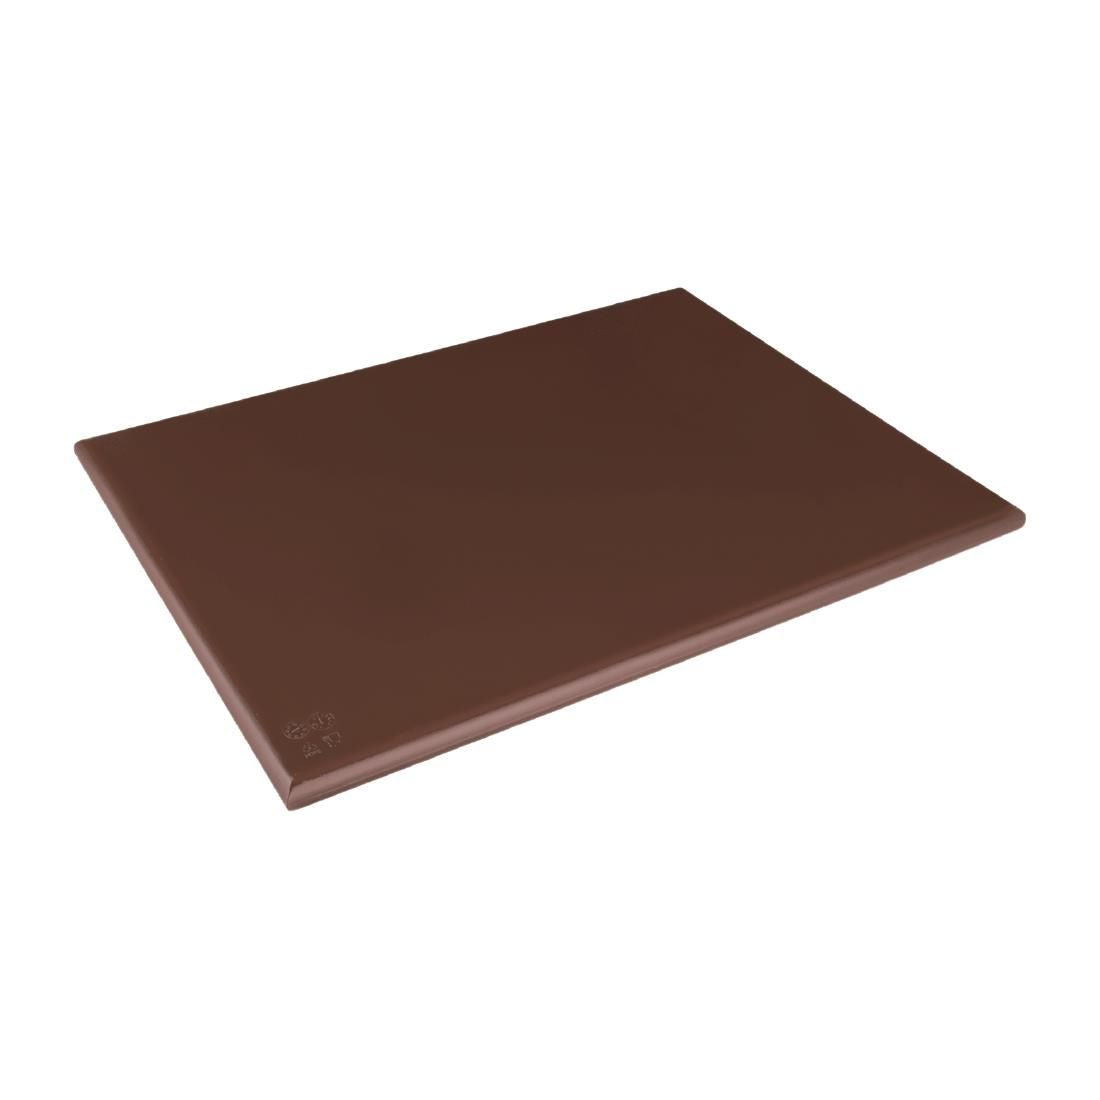 Hygiplas Extra Thick Low Density Brown Chopping Board Large JD Catering Equipment Solutions Ltd